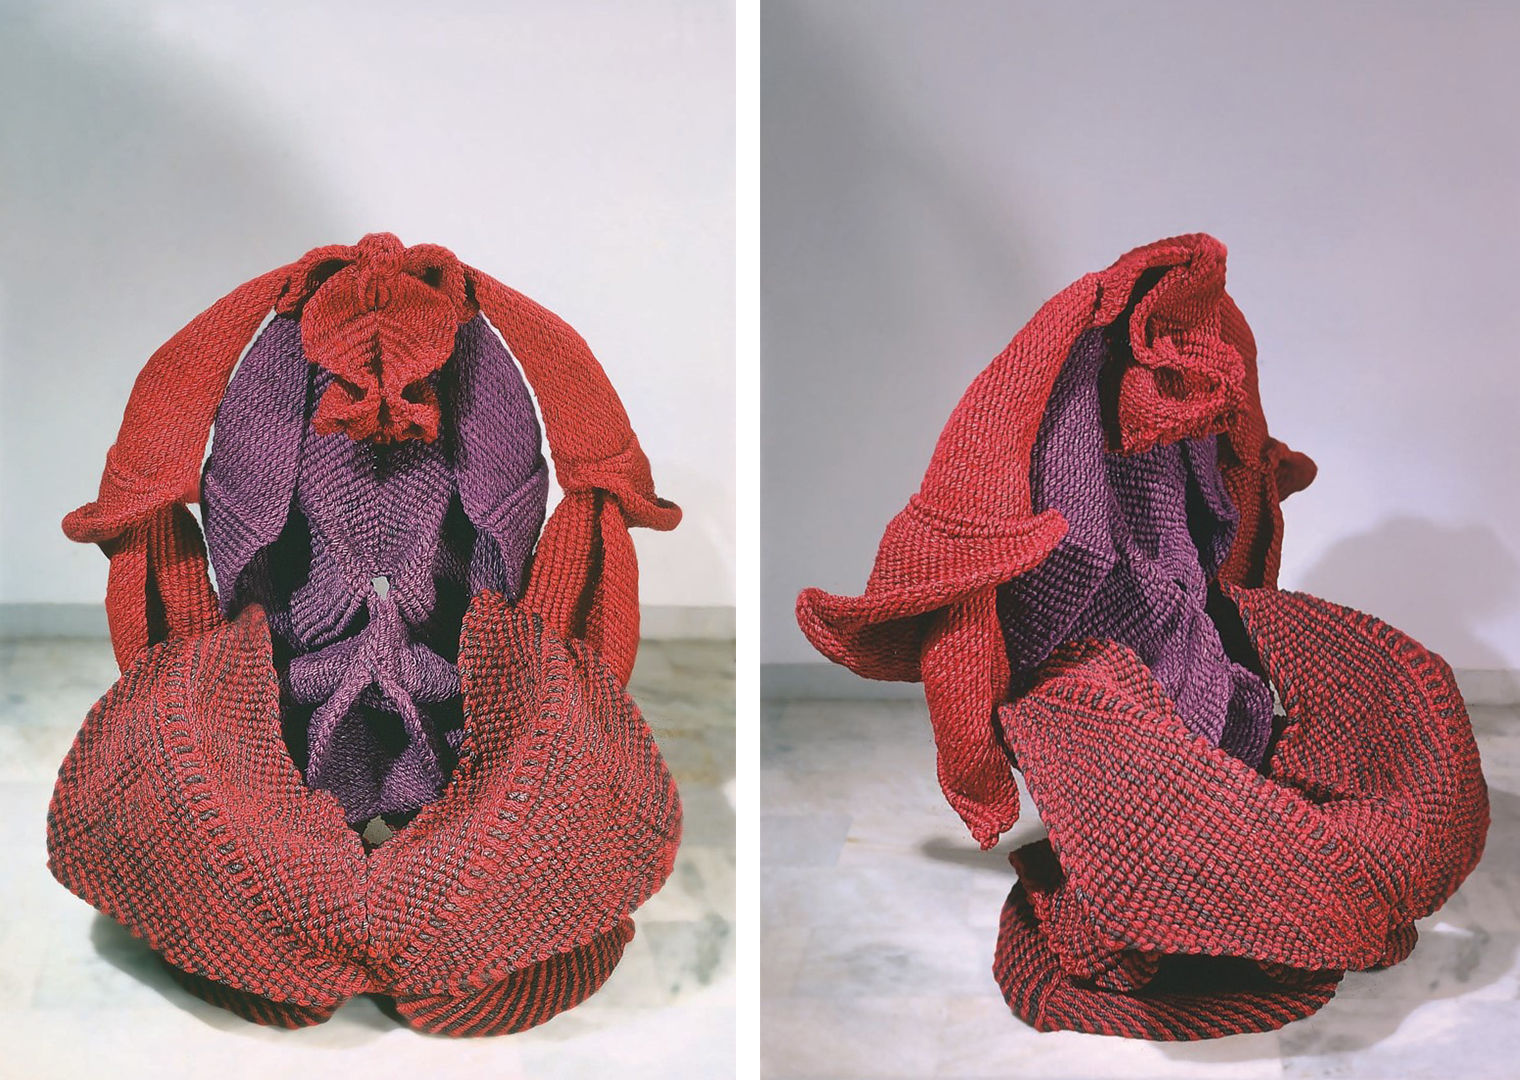 Composite image showing front and side views of Mrinalini Mukherjee’s freestanding fibre red and purple sculpture depicting  unfurling forms that resemble female genitalia.